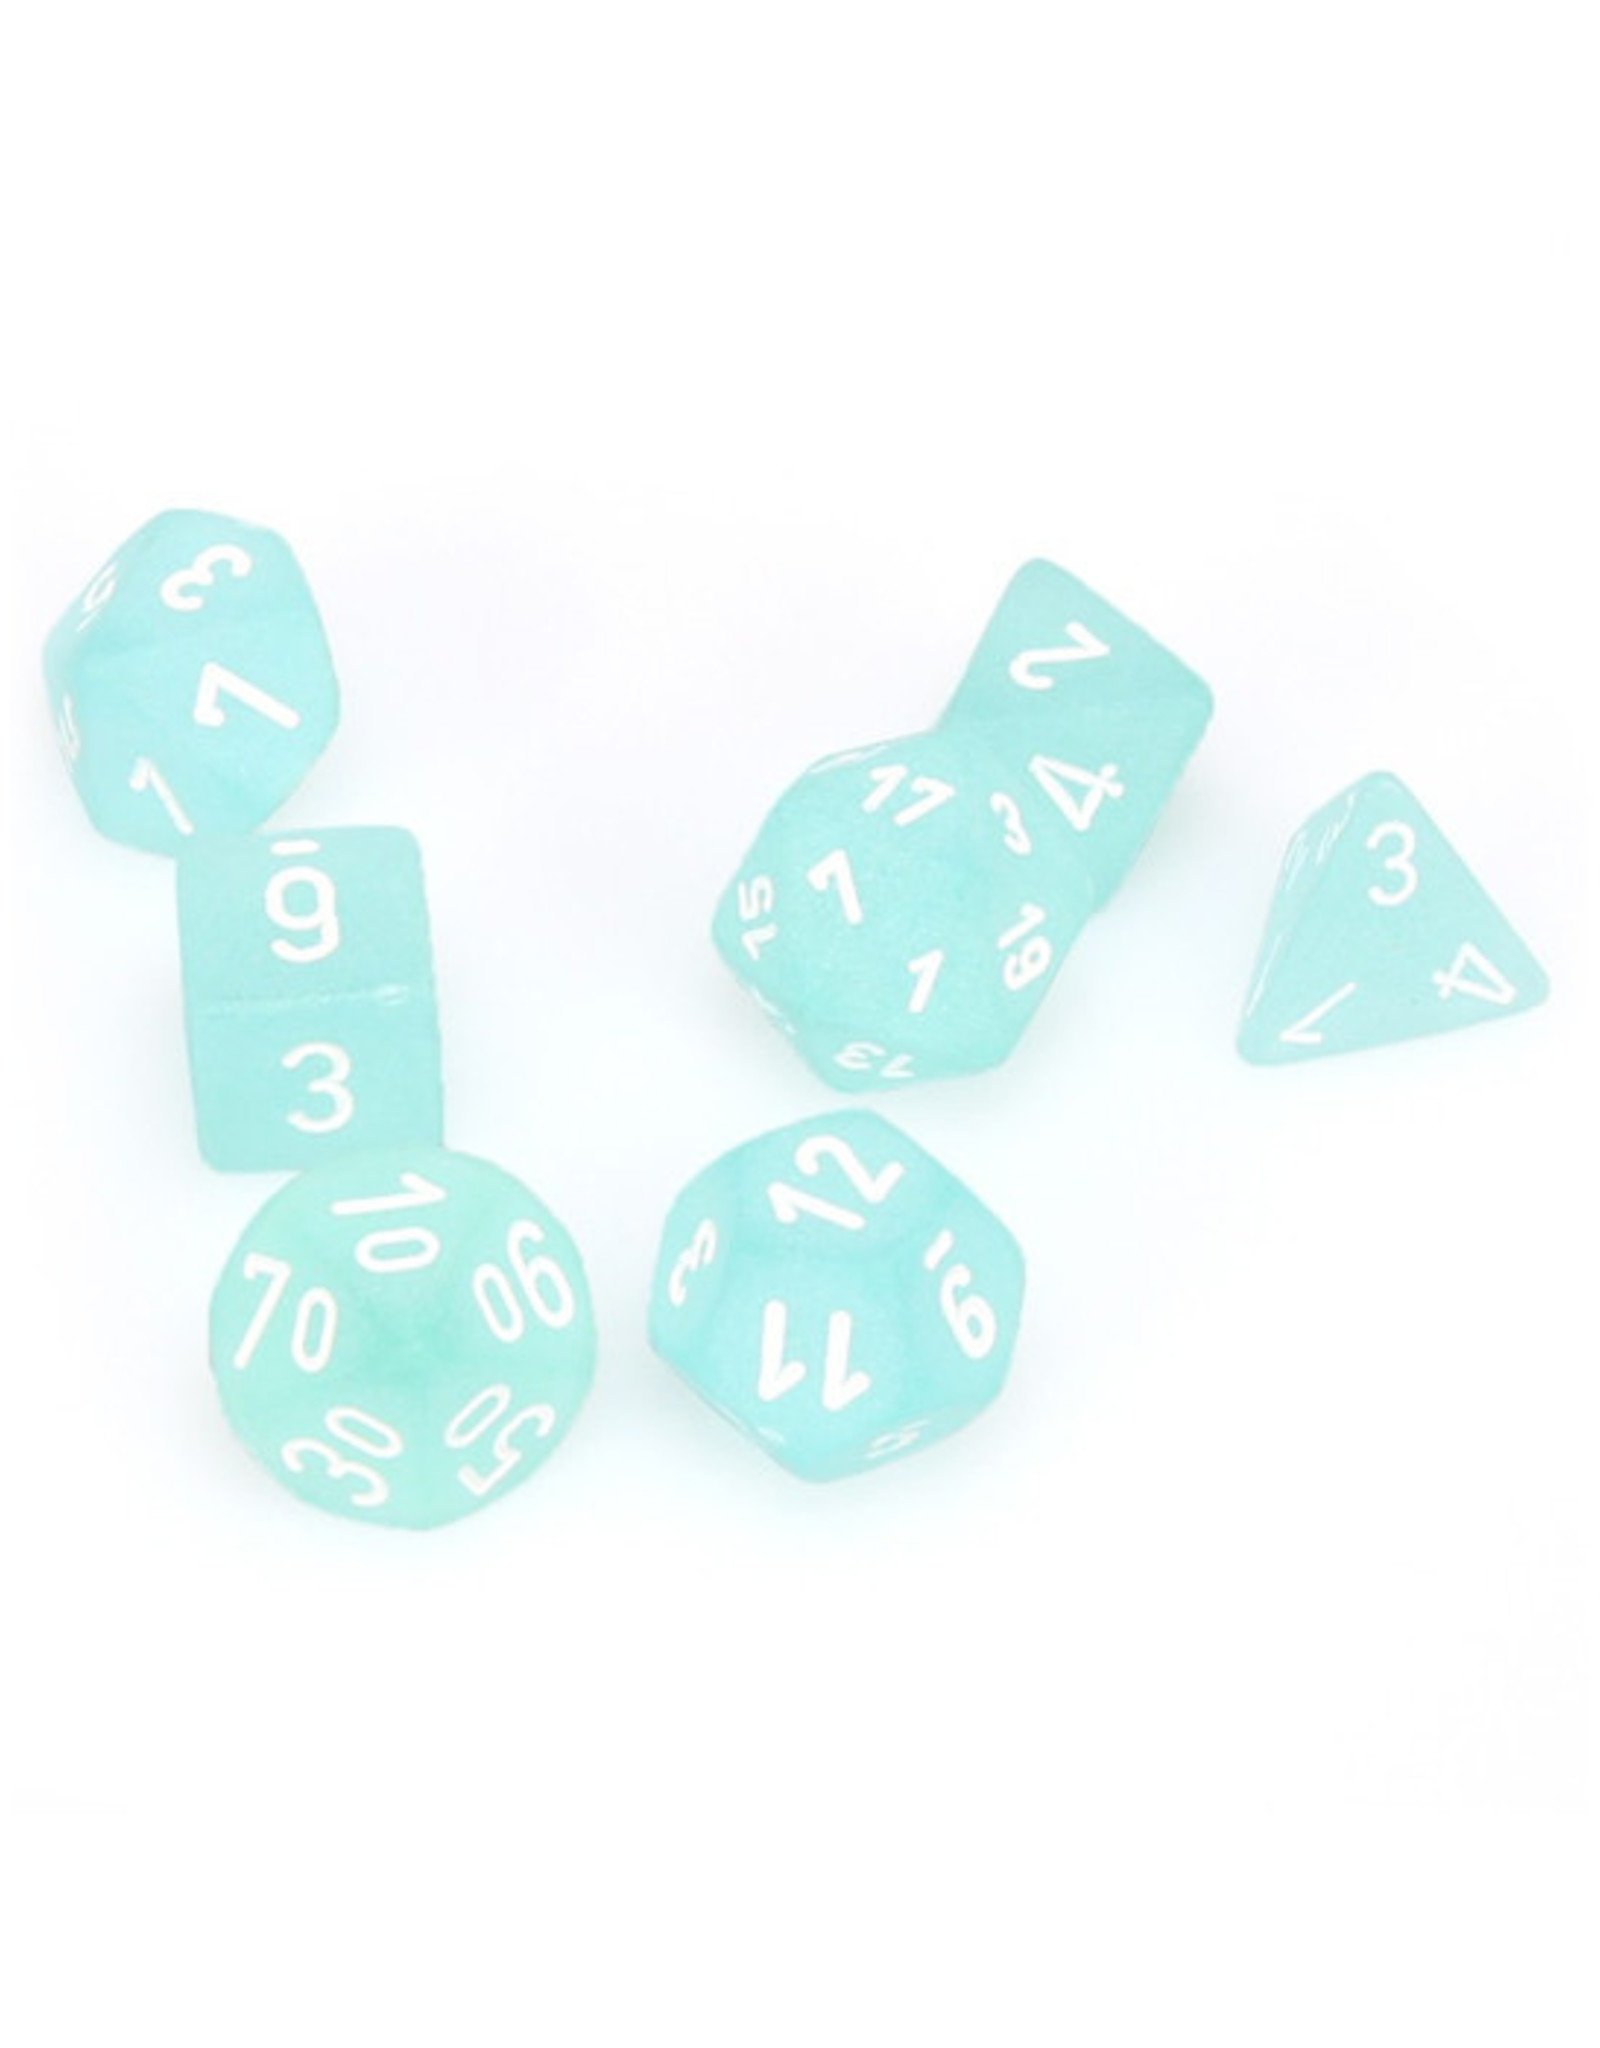 Chessex Chessex: Poly 7 Set - Frosted - Teal w/ White